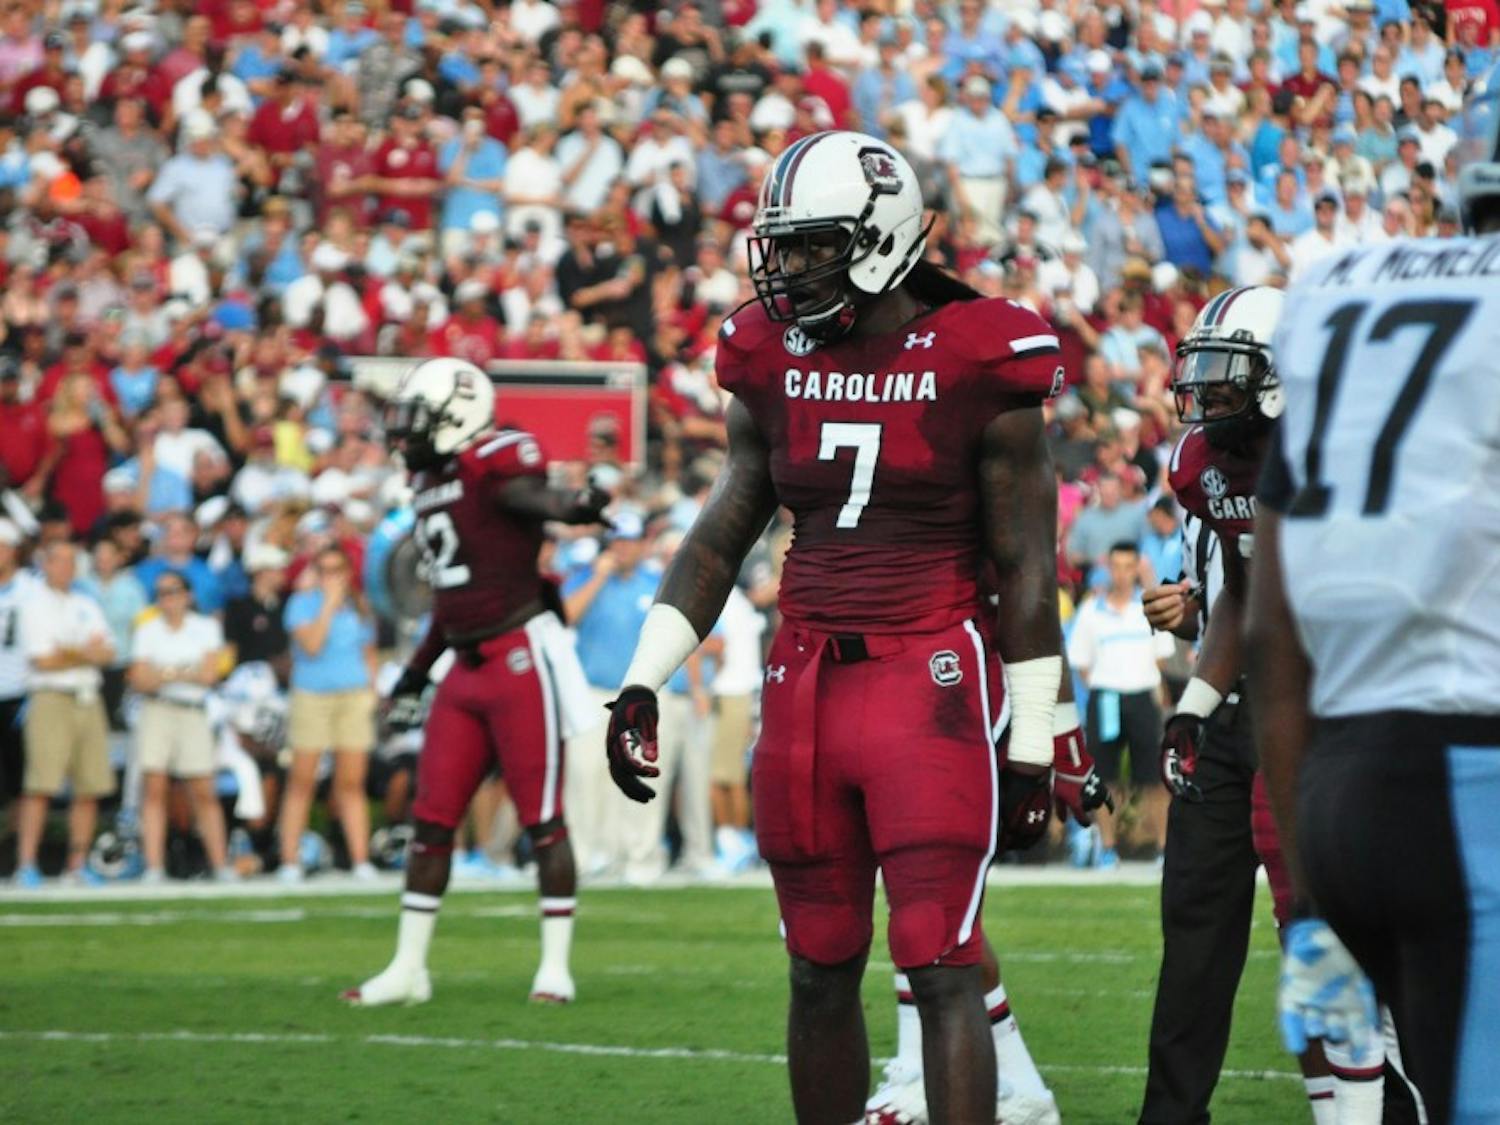 	Jadeveon Clowney spoke to the media Tuesday after drawing attention for his decision not to play in Saturday’s game.